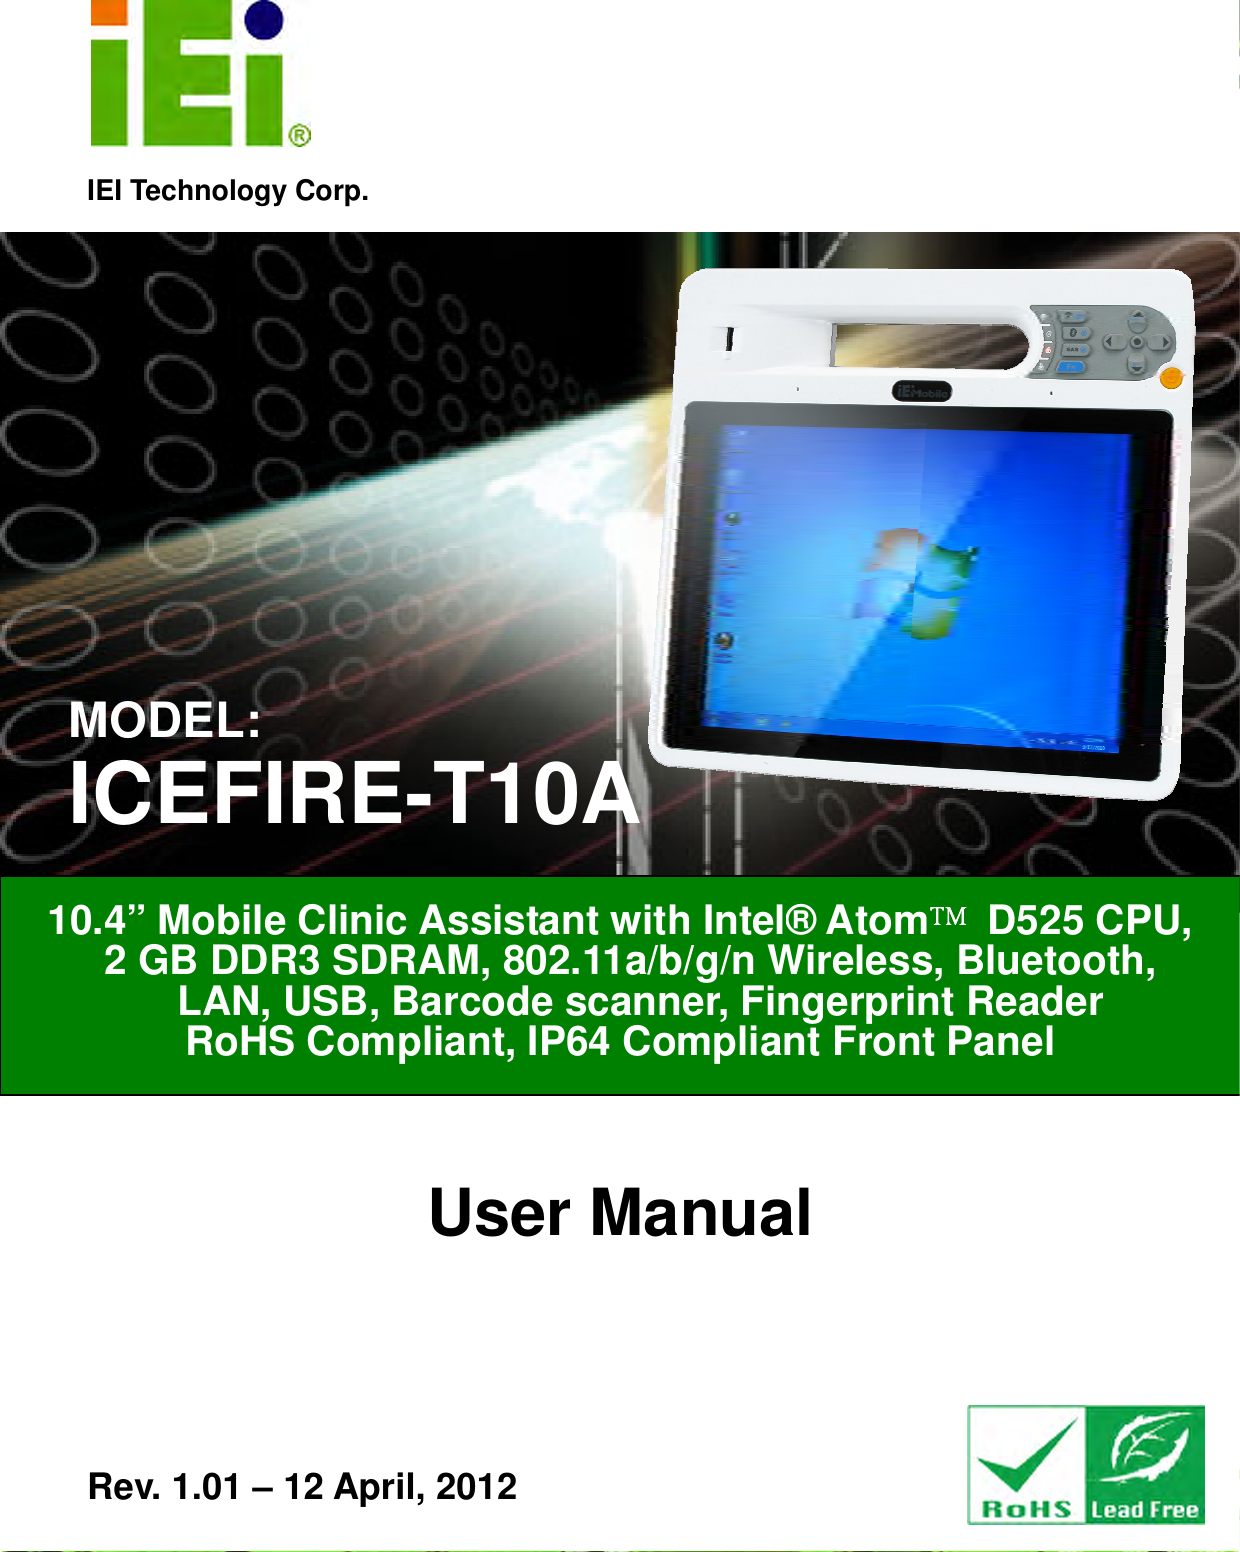   ICEFIRE-T10A Mobile Clinic Assistant Page i IEI Technology Corp. User Manual 10.4” Mobile Clinic Assistant with Intel® Atom™™™™ D525 CPU,   2 GB DDR3 SDRAM, 802.11a/b/g/n Wireless, Bluetooth,     LAN, USB, Barcode scanner, Fingerprint Reader RoHS Compliant, IP64 Compliant Front Panel  Rev. 1.01 – 12 April, 2012 MODEL: ICEFIRE-T10A 